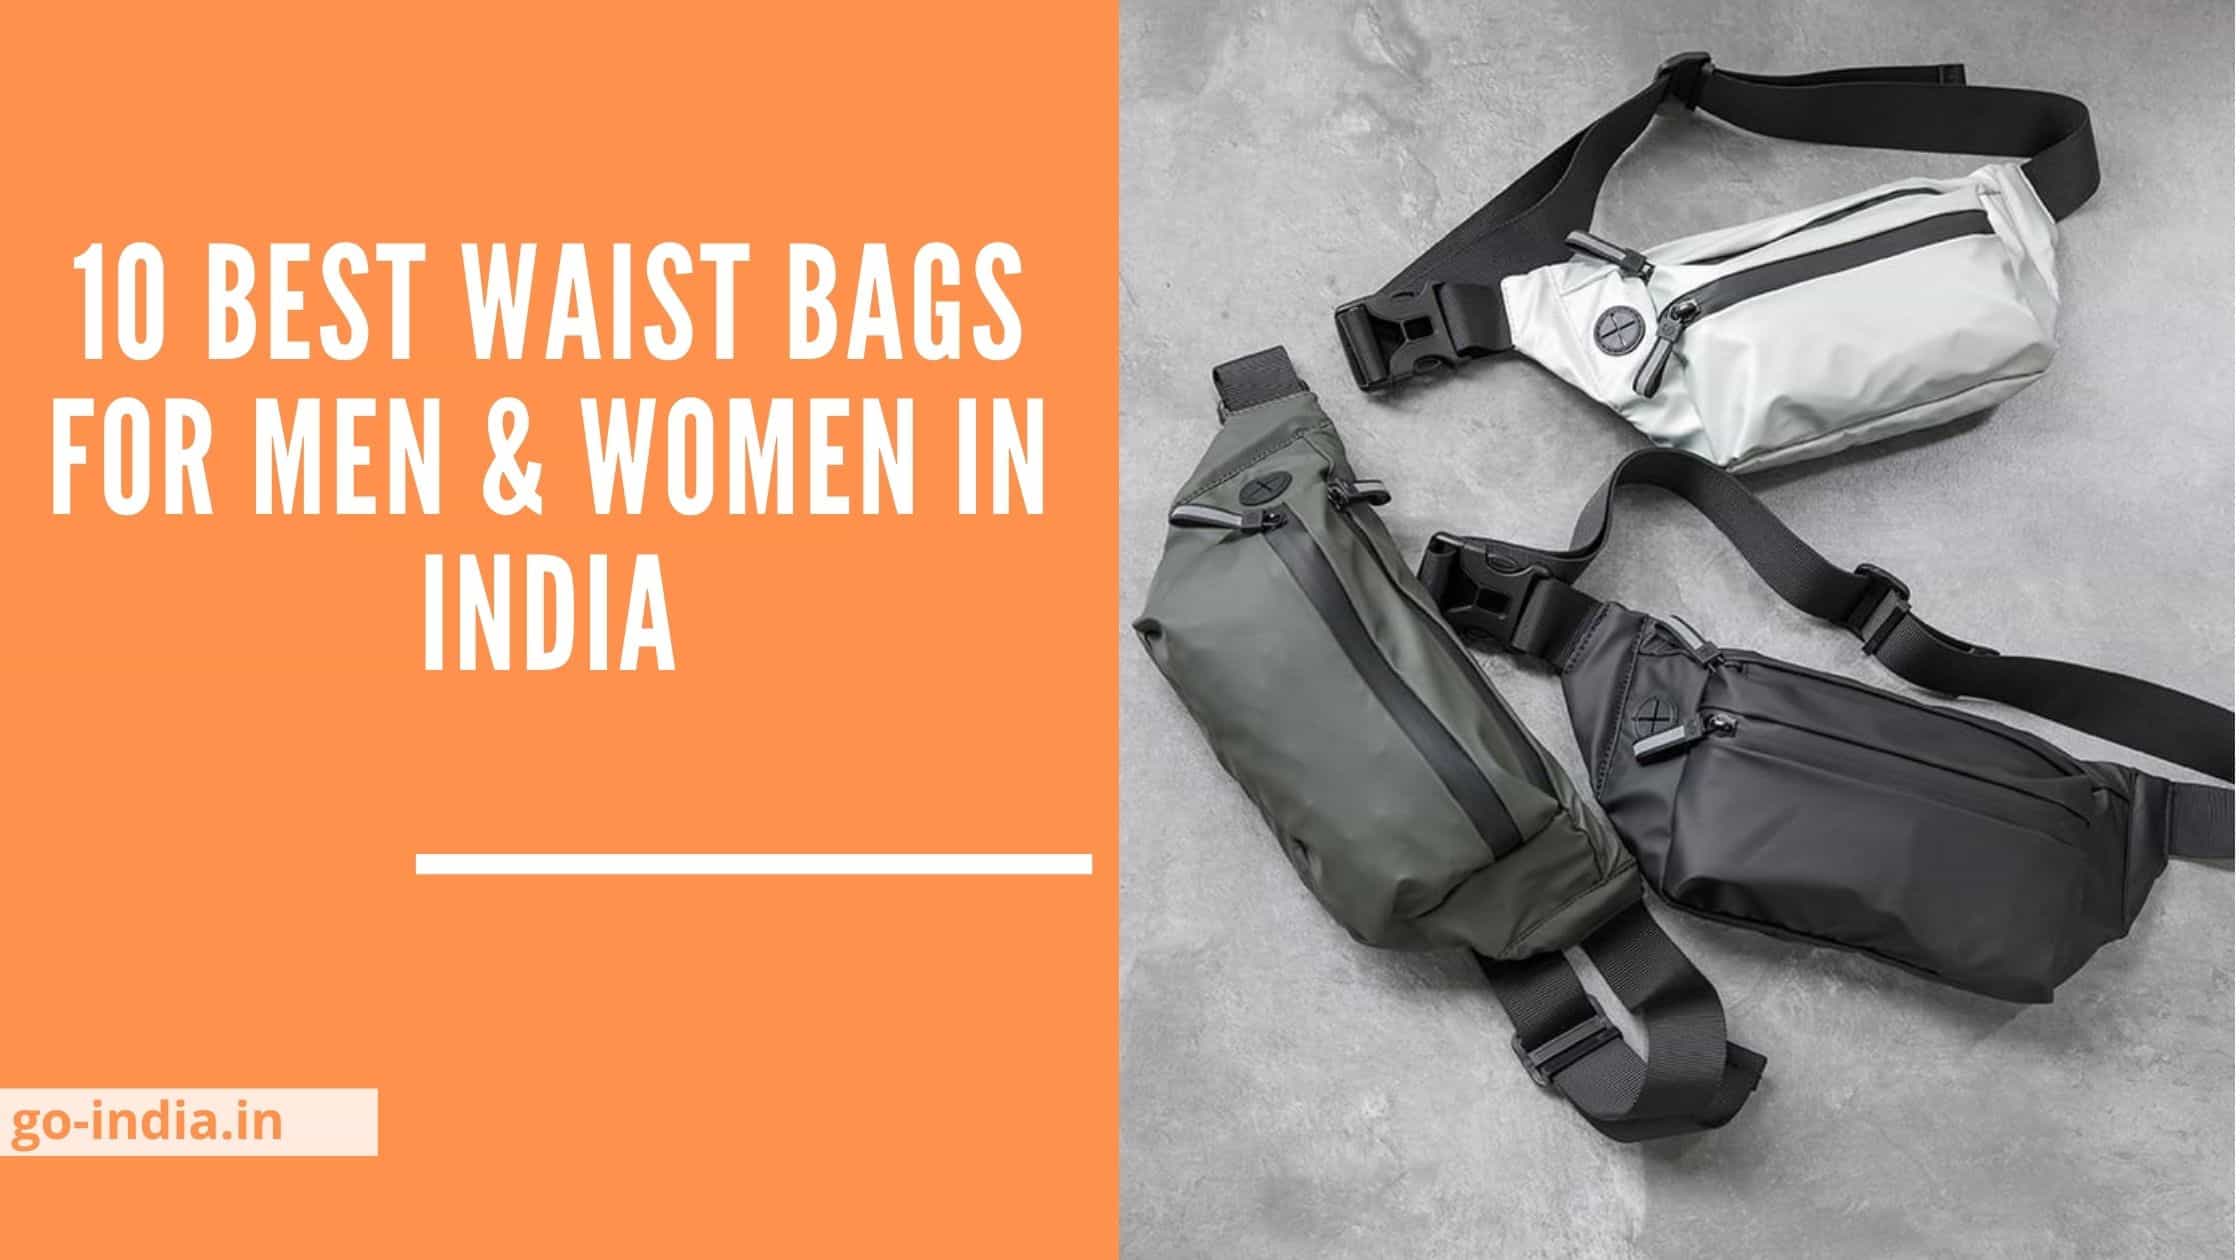 10 Best Waist Bags For Men & Women In India 2021 – Travel Pouch